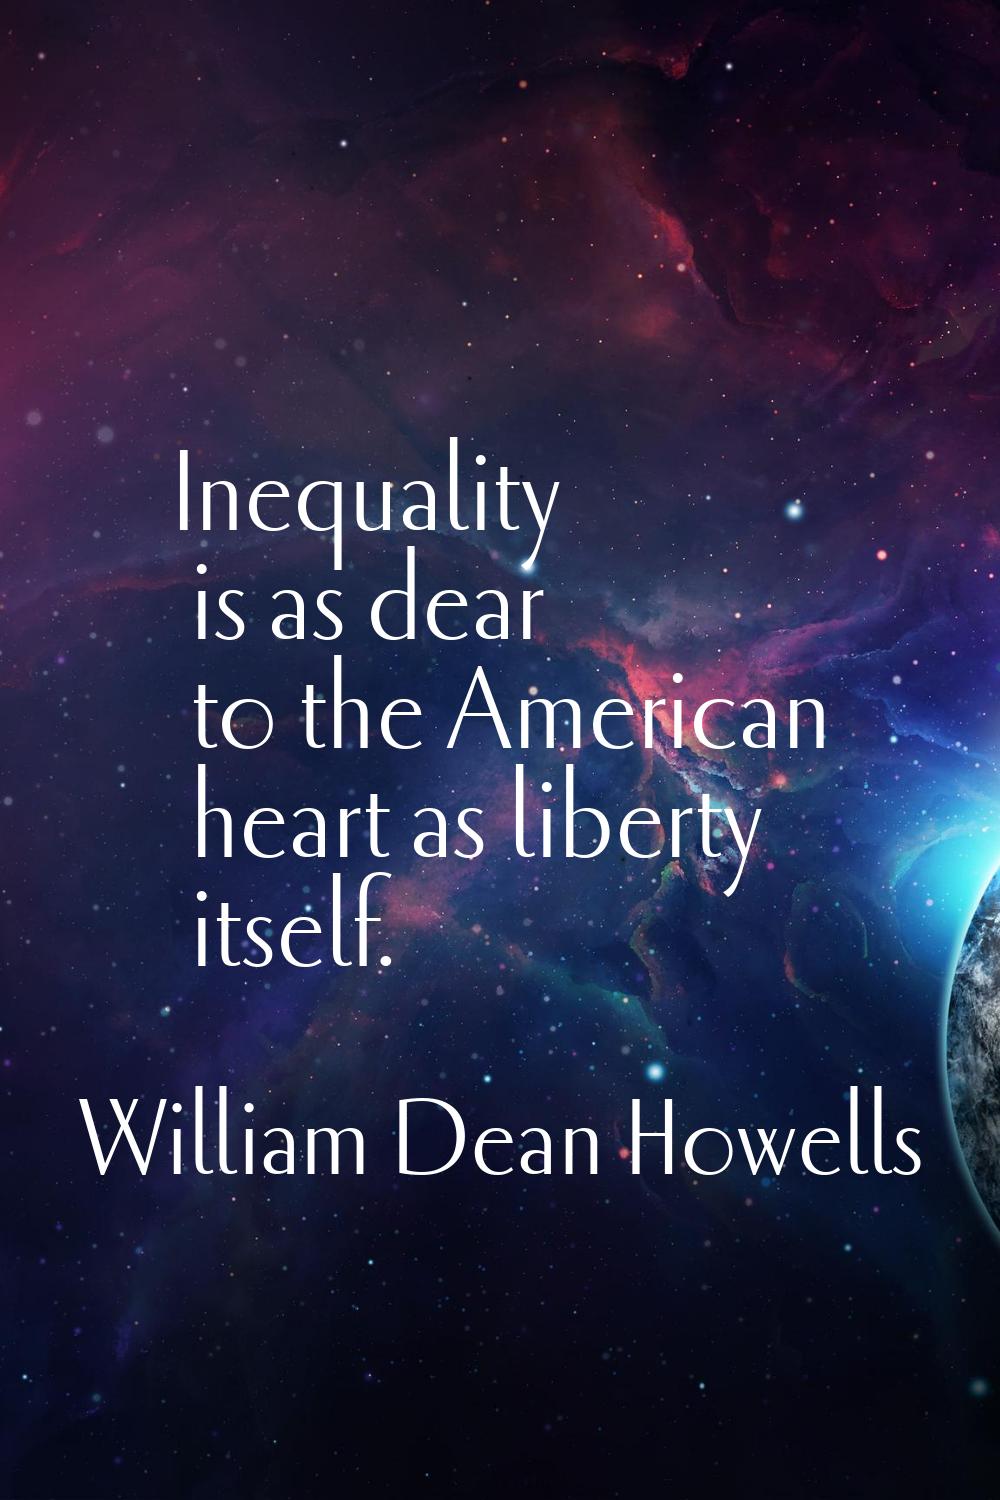 Inequality is as dear to the American heart as liberty itself.